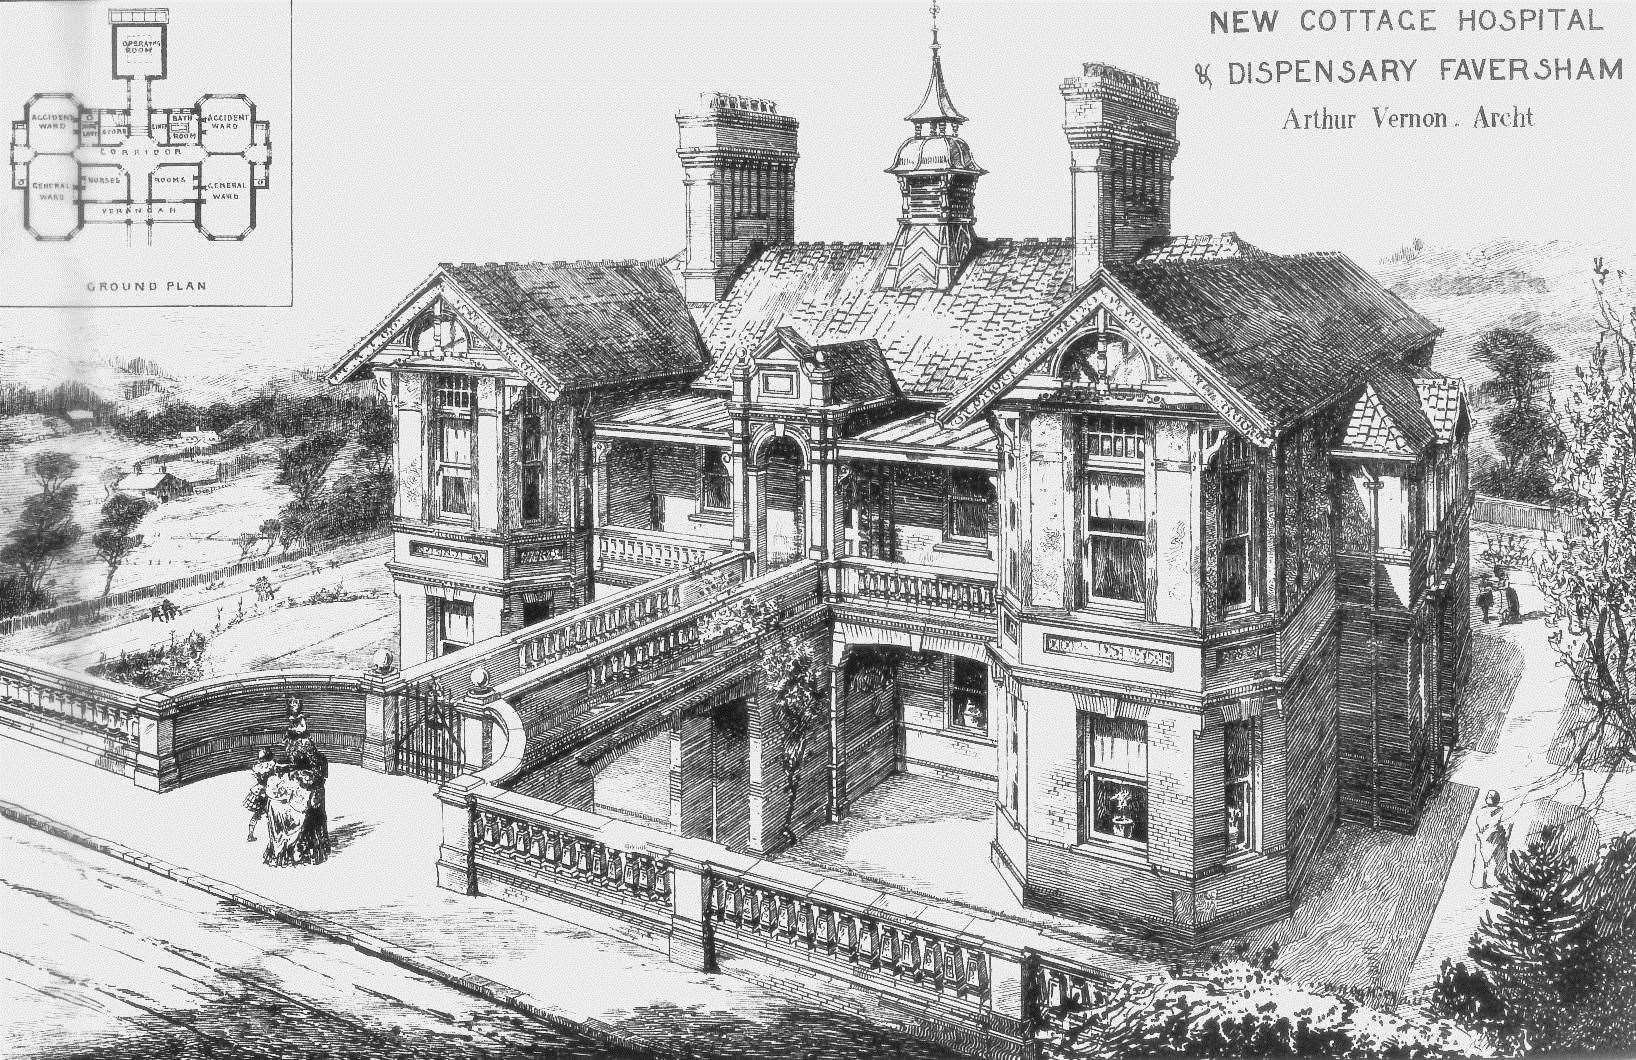 How the Cottage Hospital would have looked in 1888